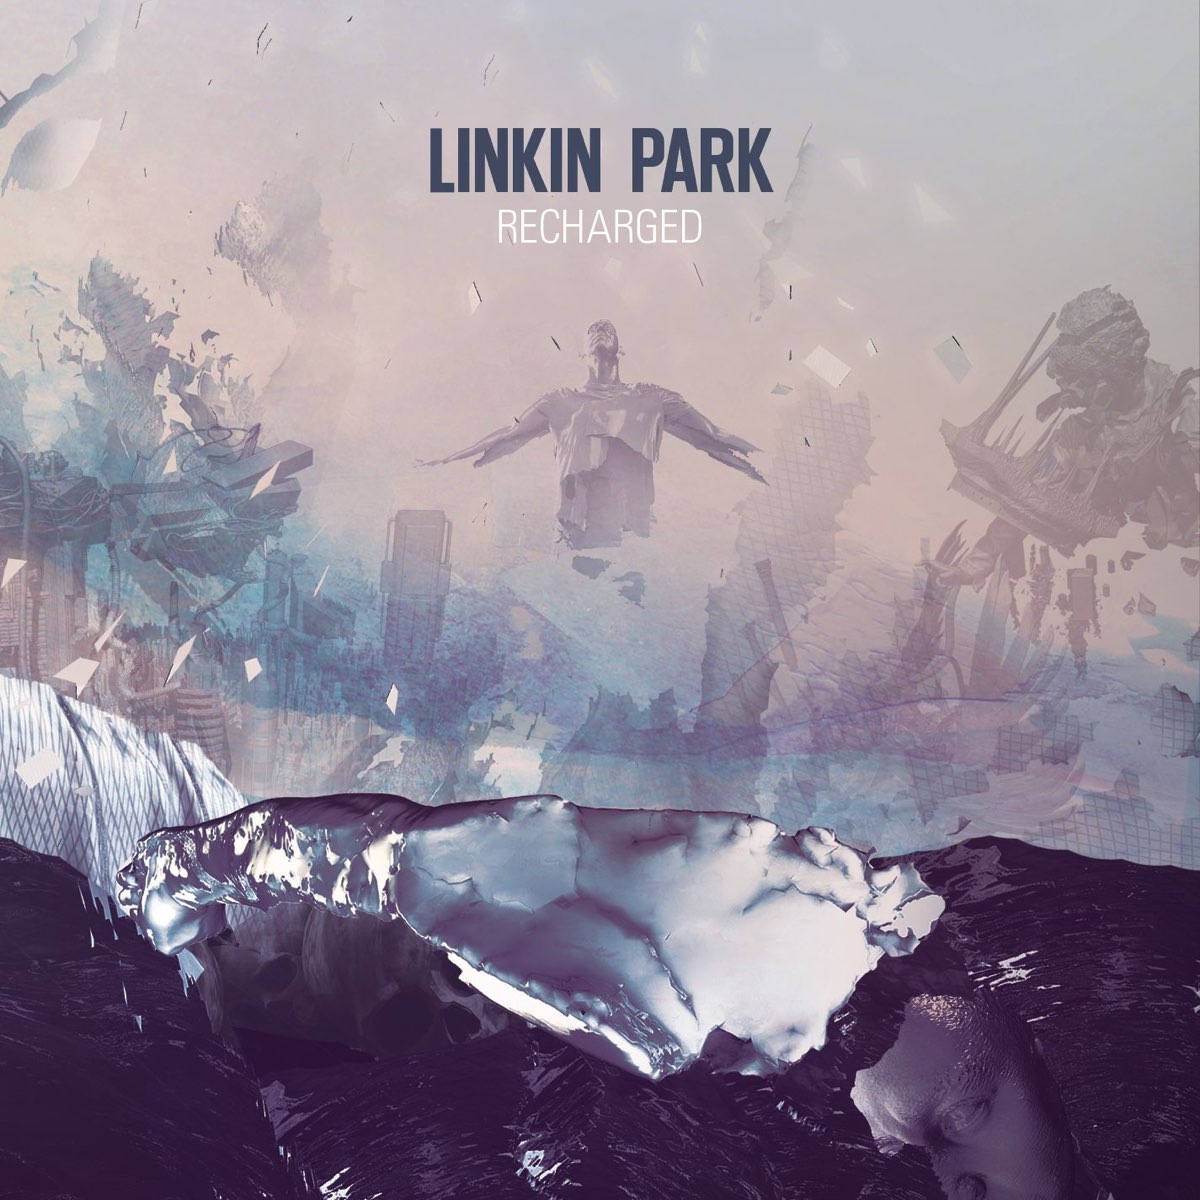 ‎RECHARGED by LINKIN PARK on Apple Music